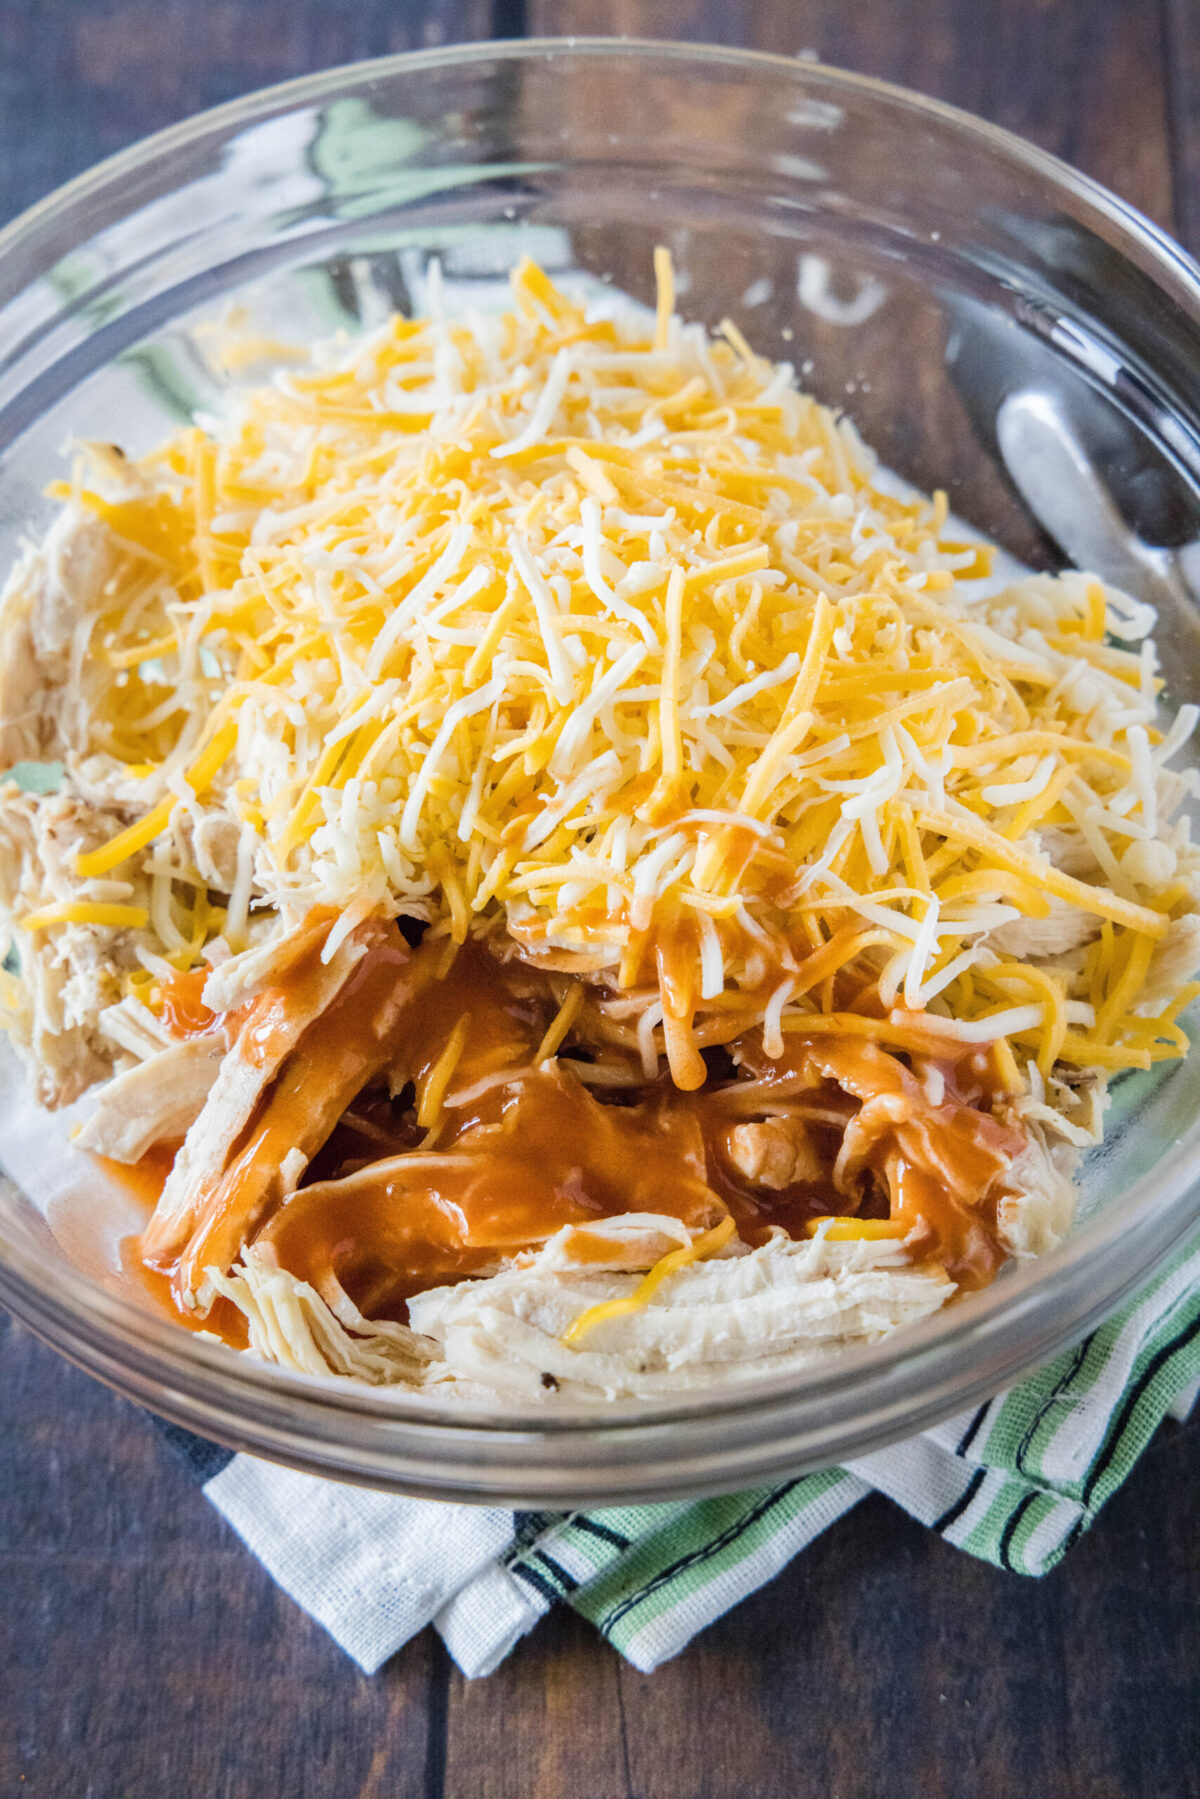 A mixing bowl filled with shredded chicken, wing sauce, and shredded cheese